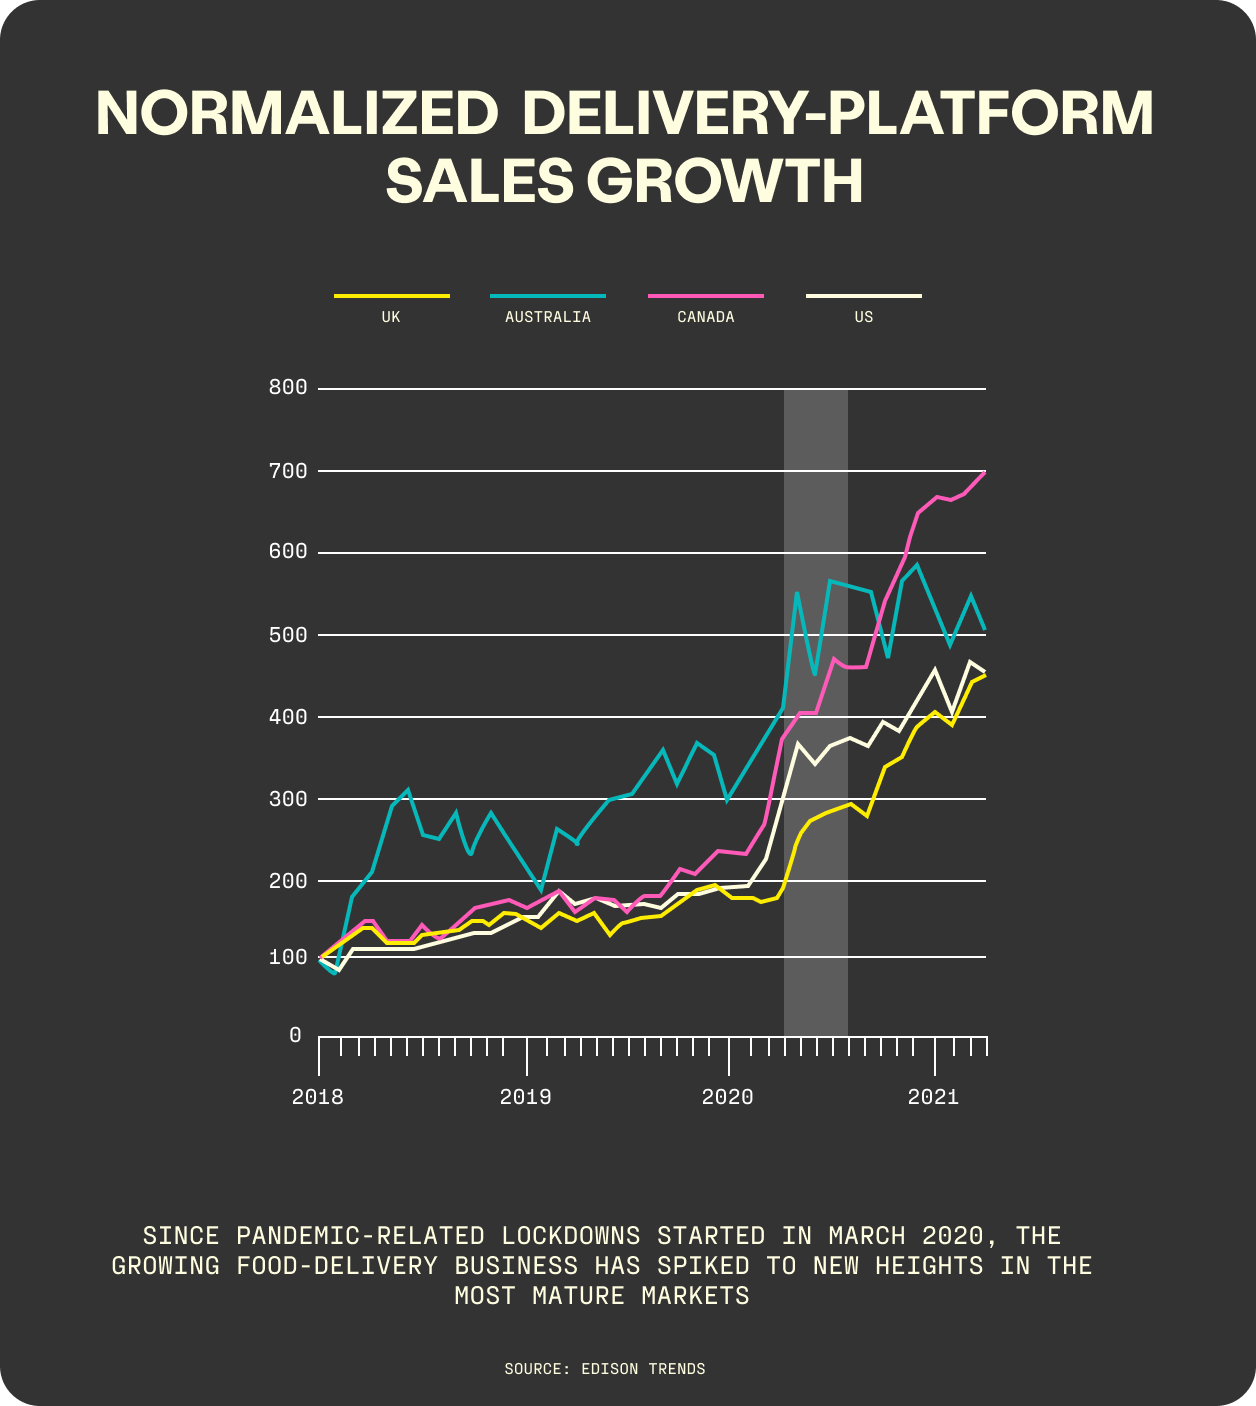 Normalized Delivery Platform sales growth data.